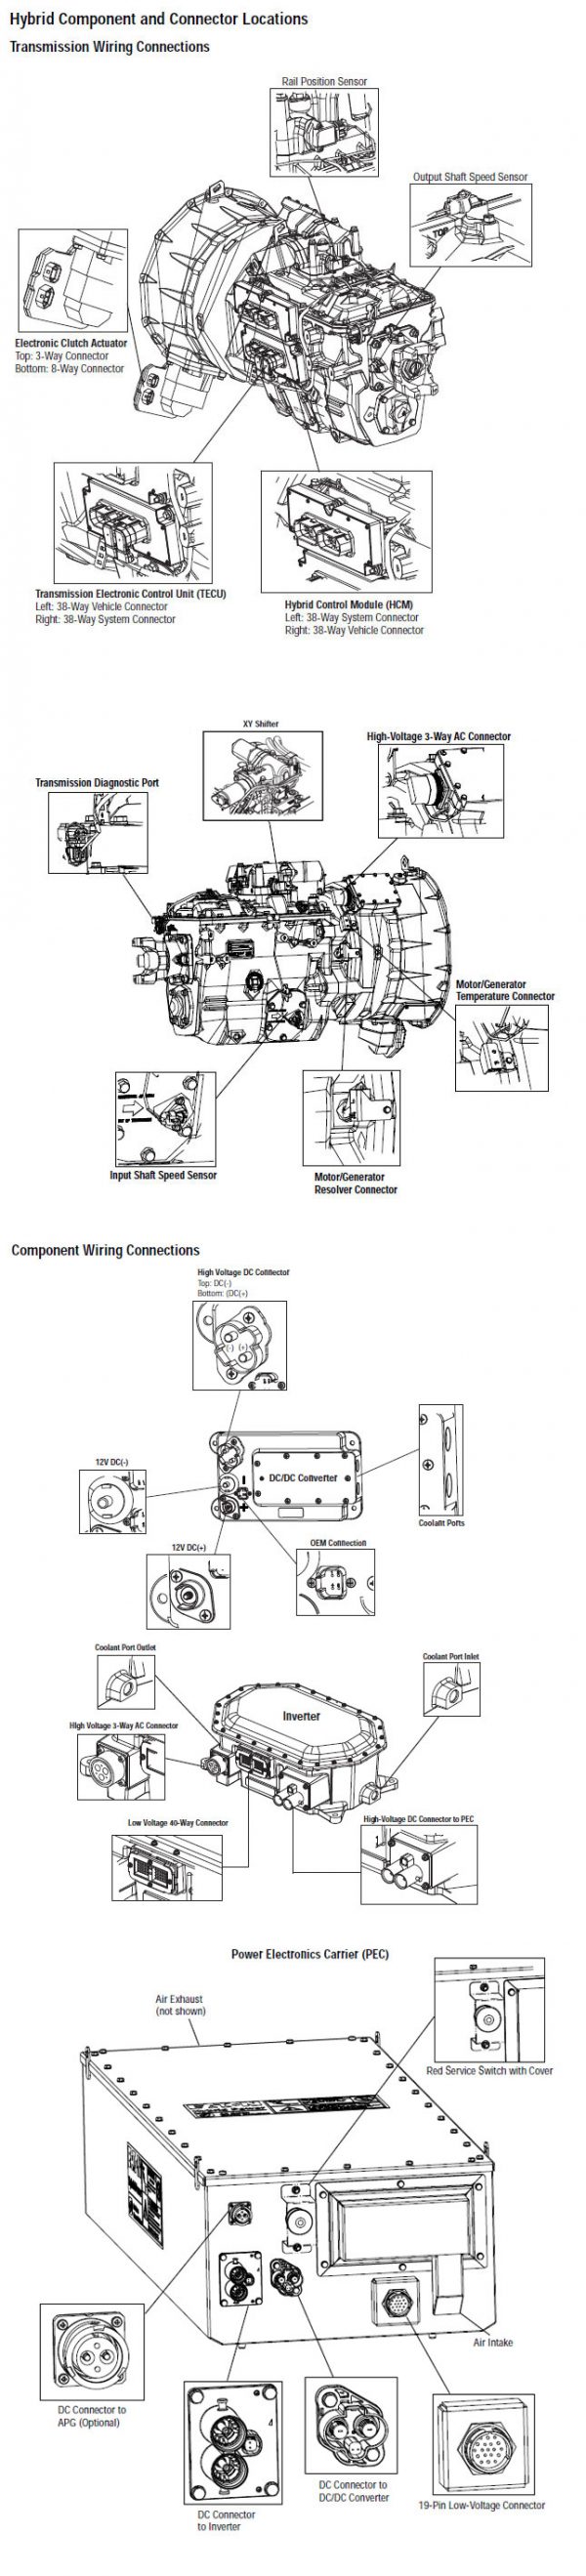 Eaton Hybrid Component and Connector Locations MY09 Systems